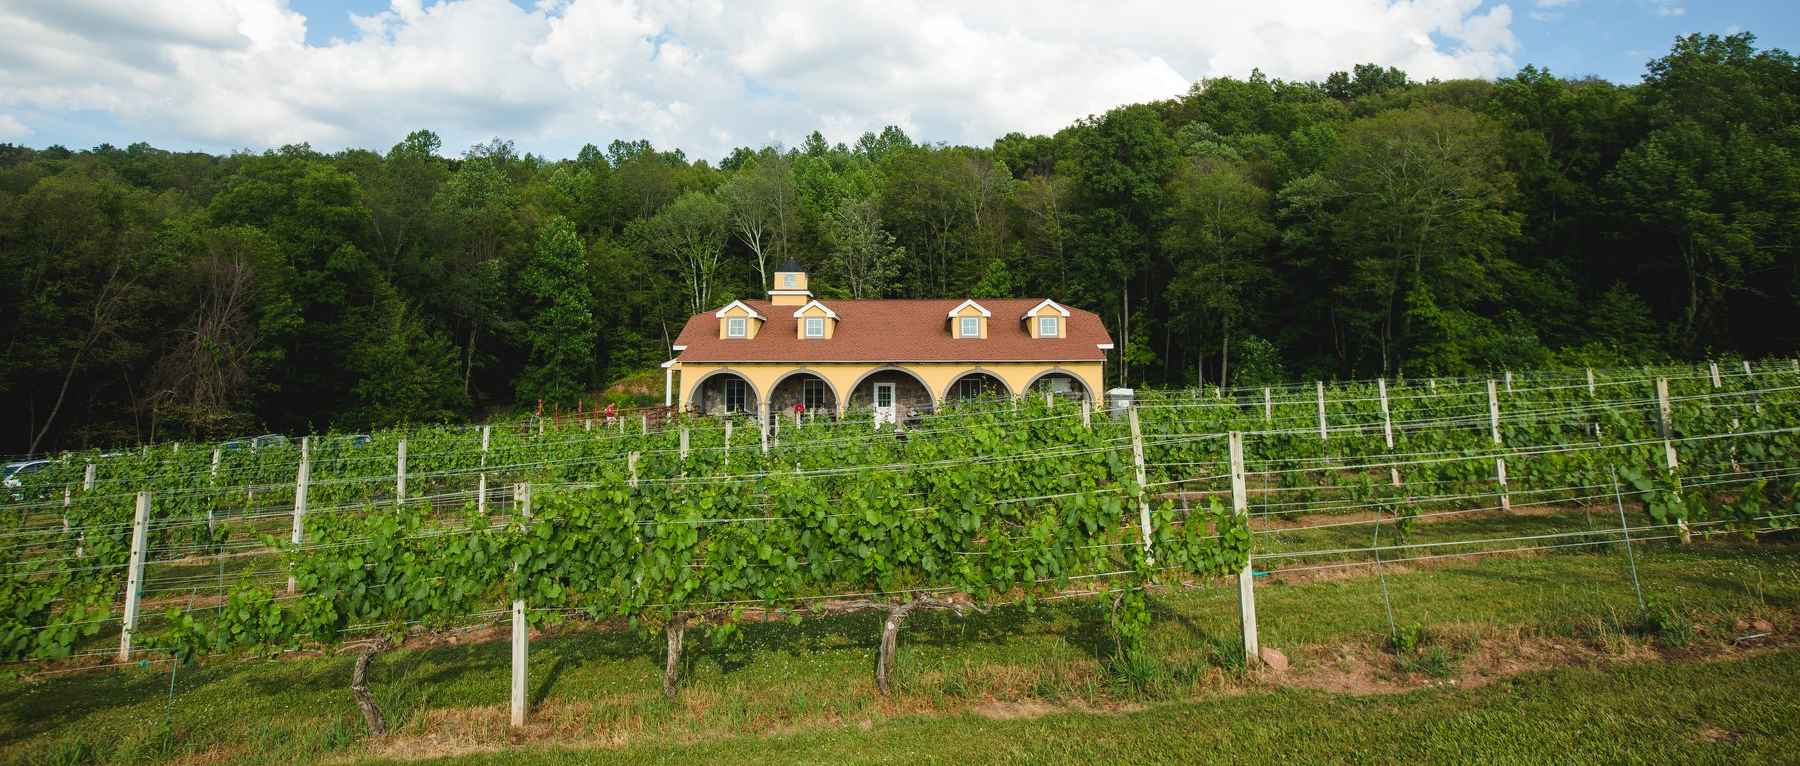 Spring at Paradise Hills Vineyards in Wallingford, CT